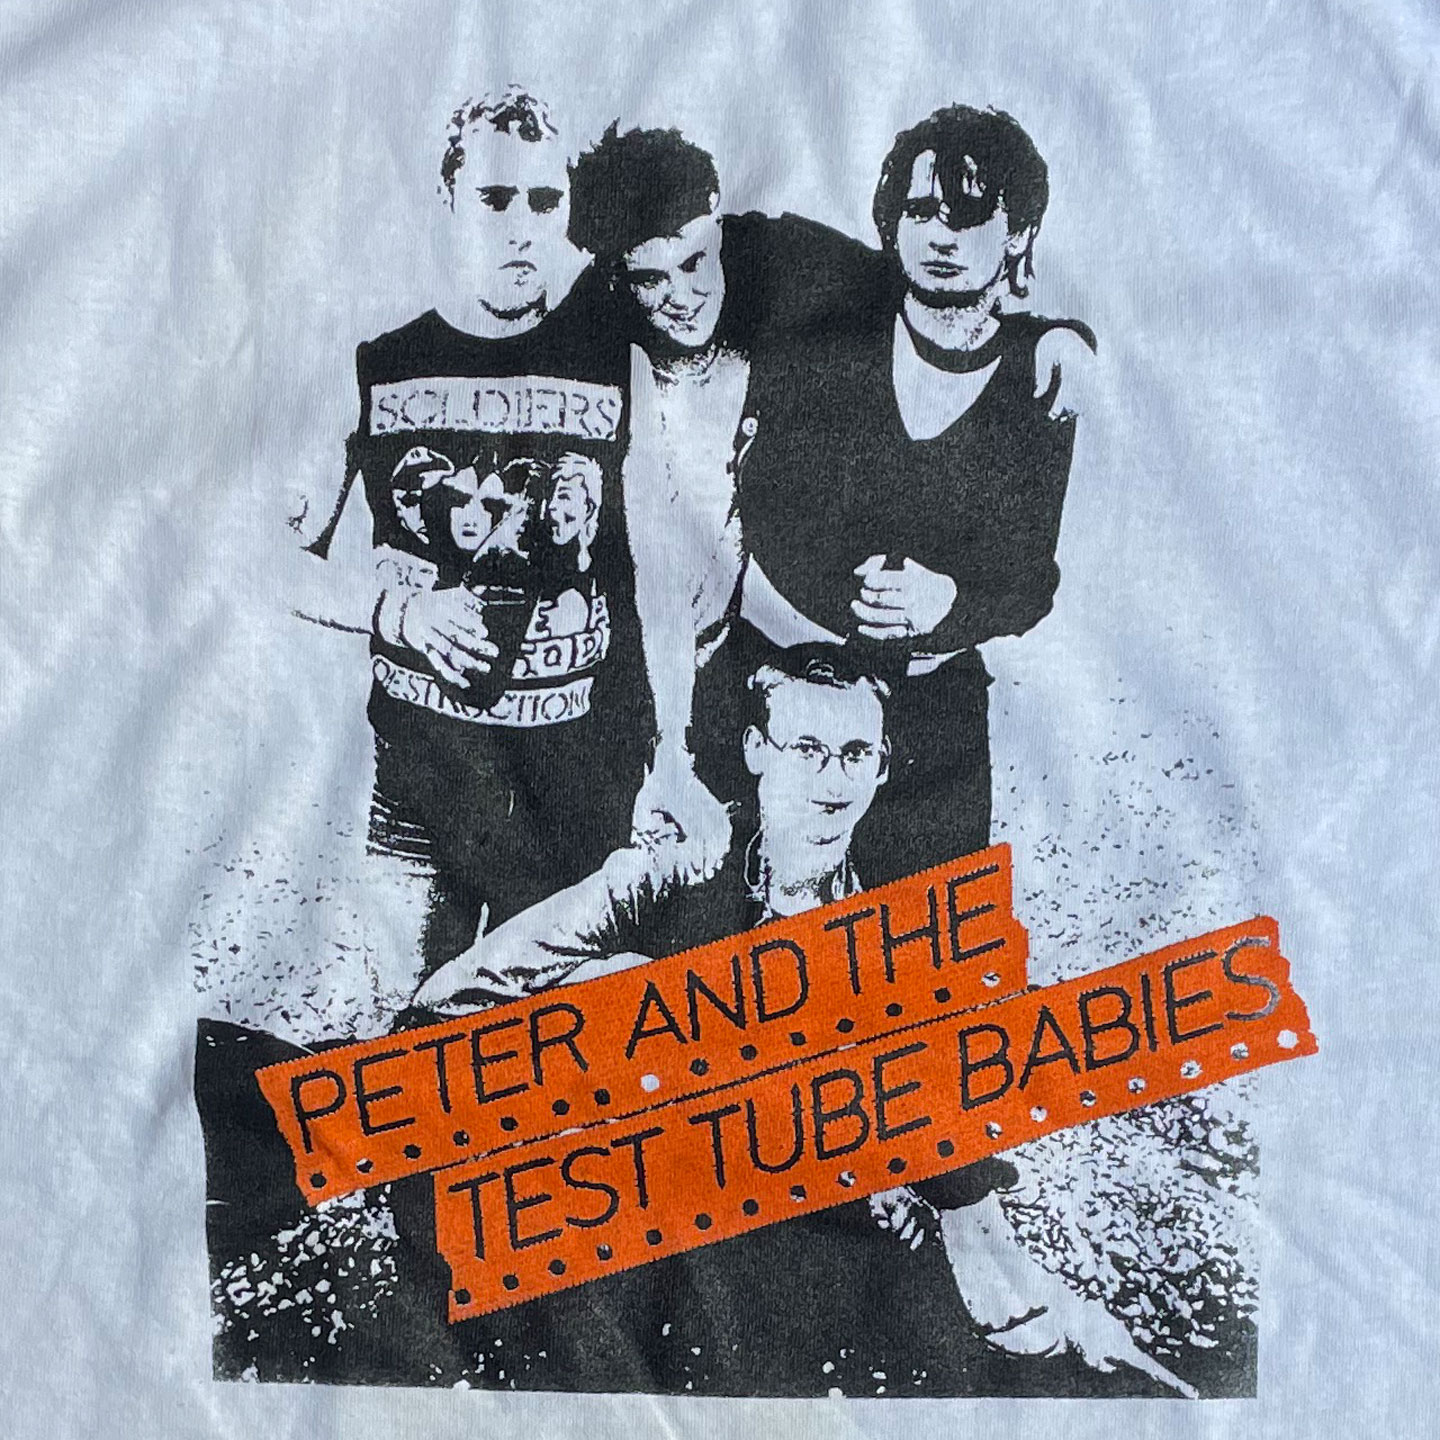 PETER AND THE TEST TUBE BABIES Tシャツ PHOTO